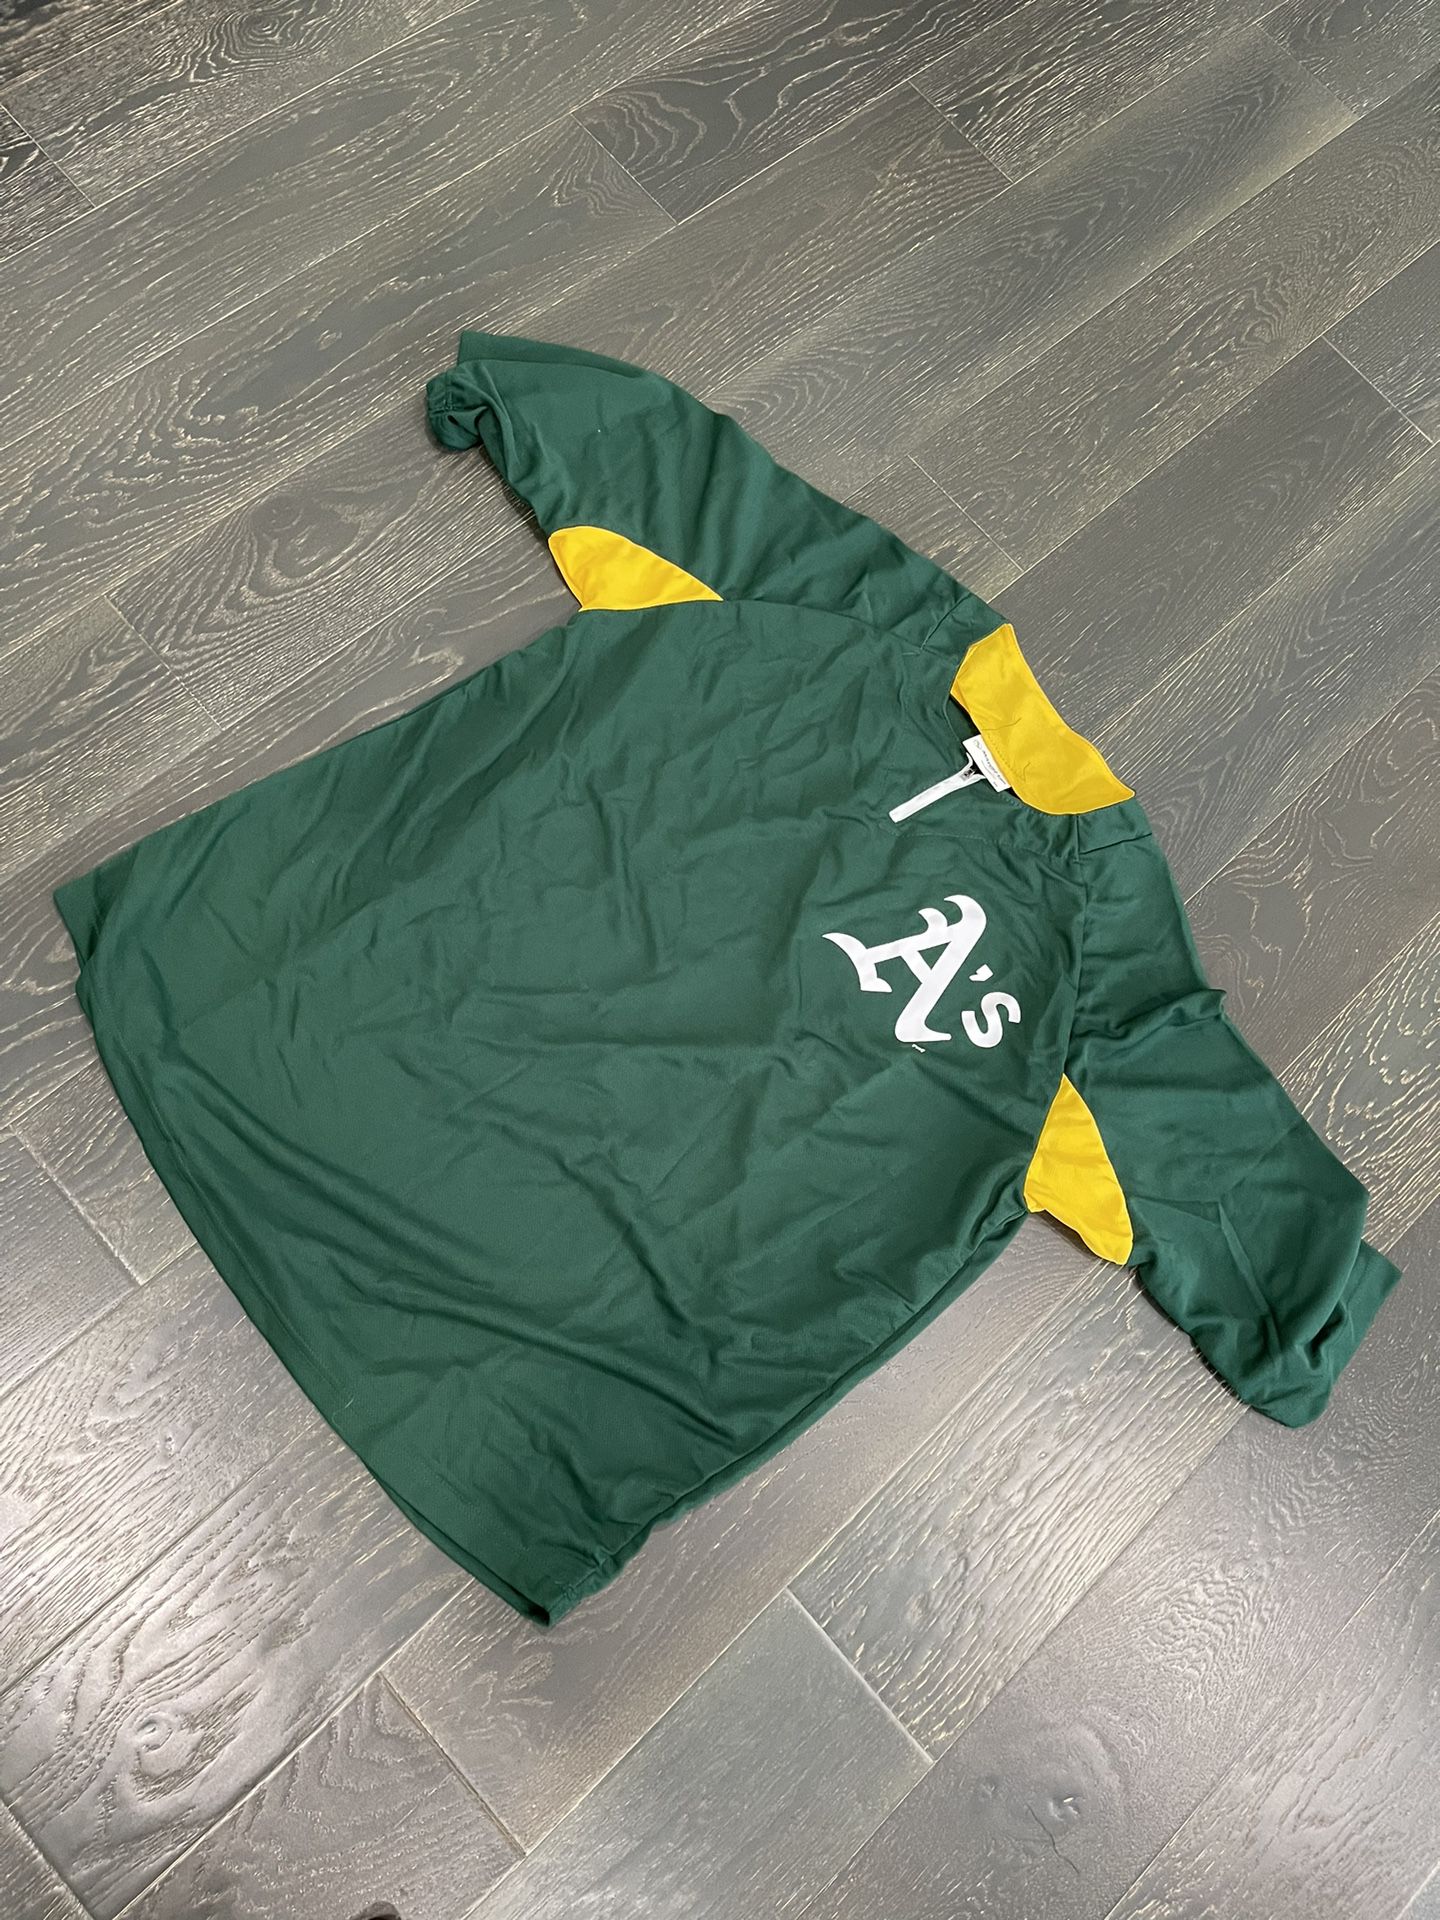 Los Tiburones Sharks Jersey Size XL for Sale in San Jose, CA - OfferUp